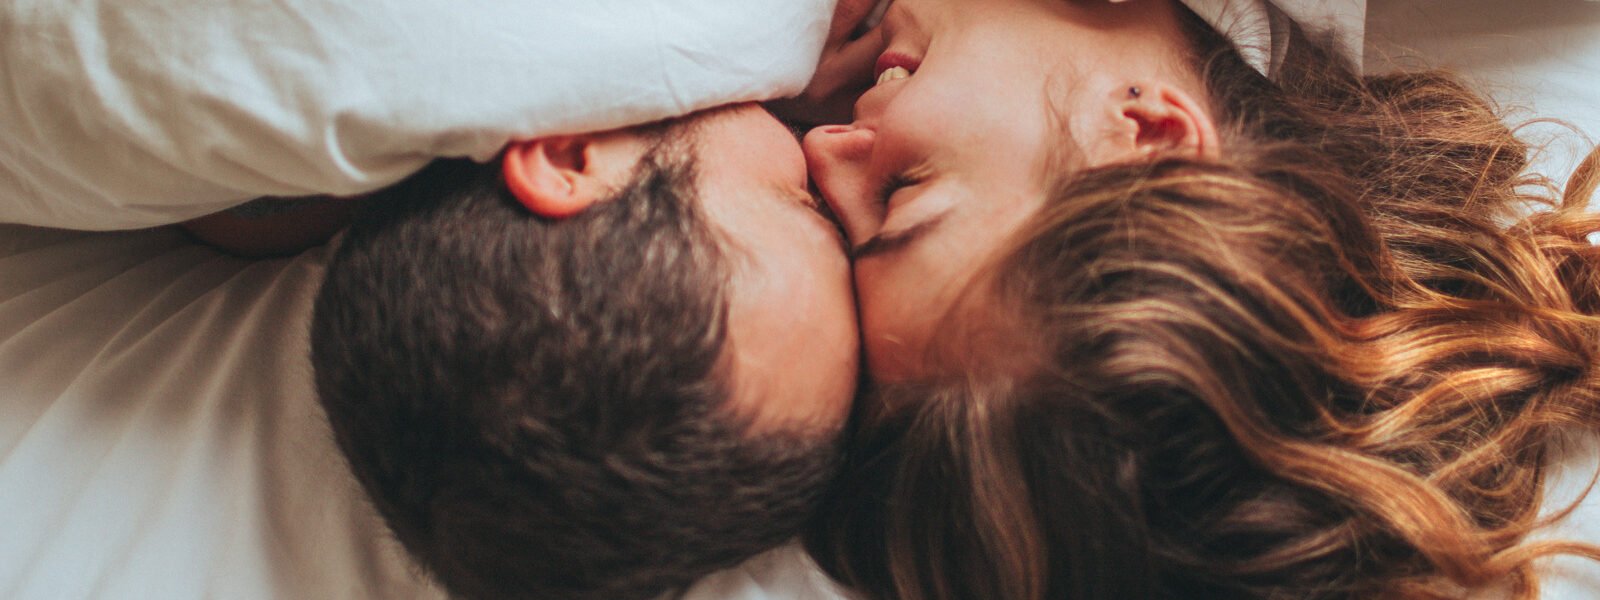 The Nutrient Deficiency That Could Be Causing Your Low Sex Drive - Health Digest